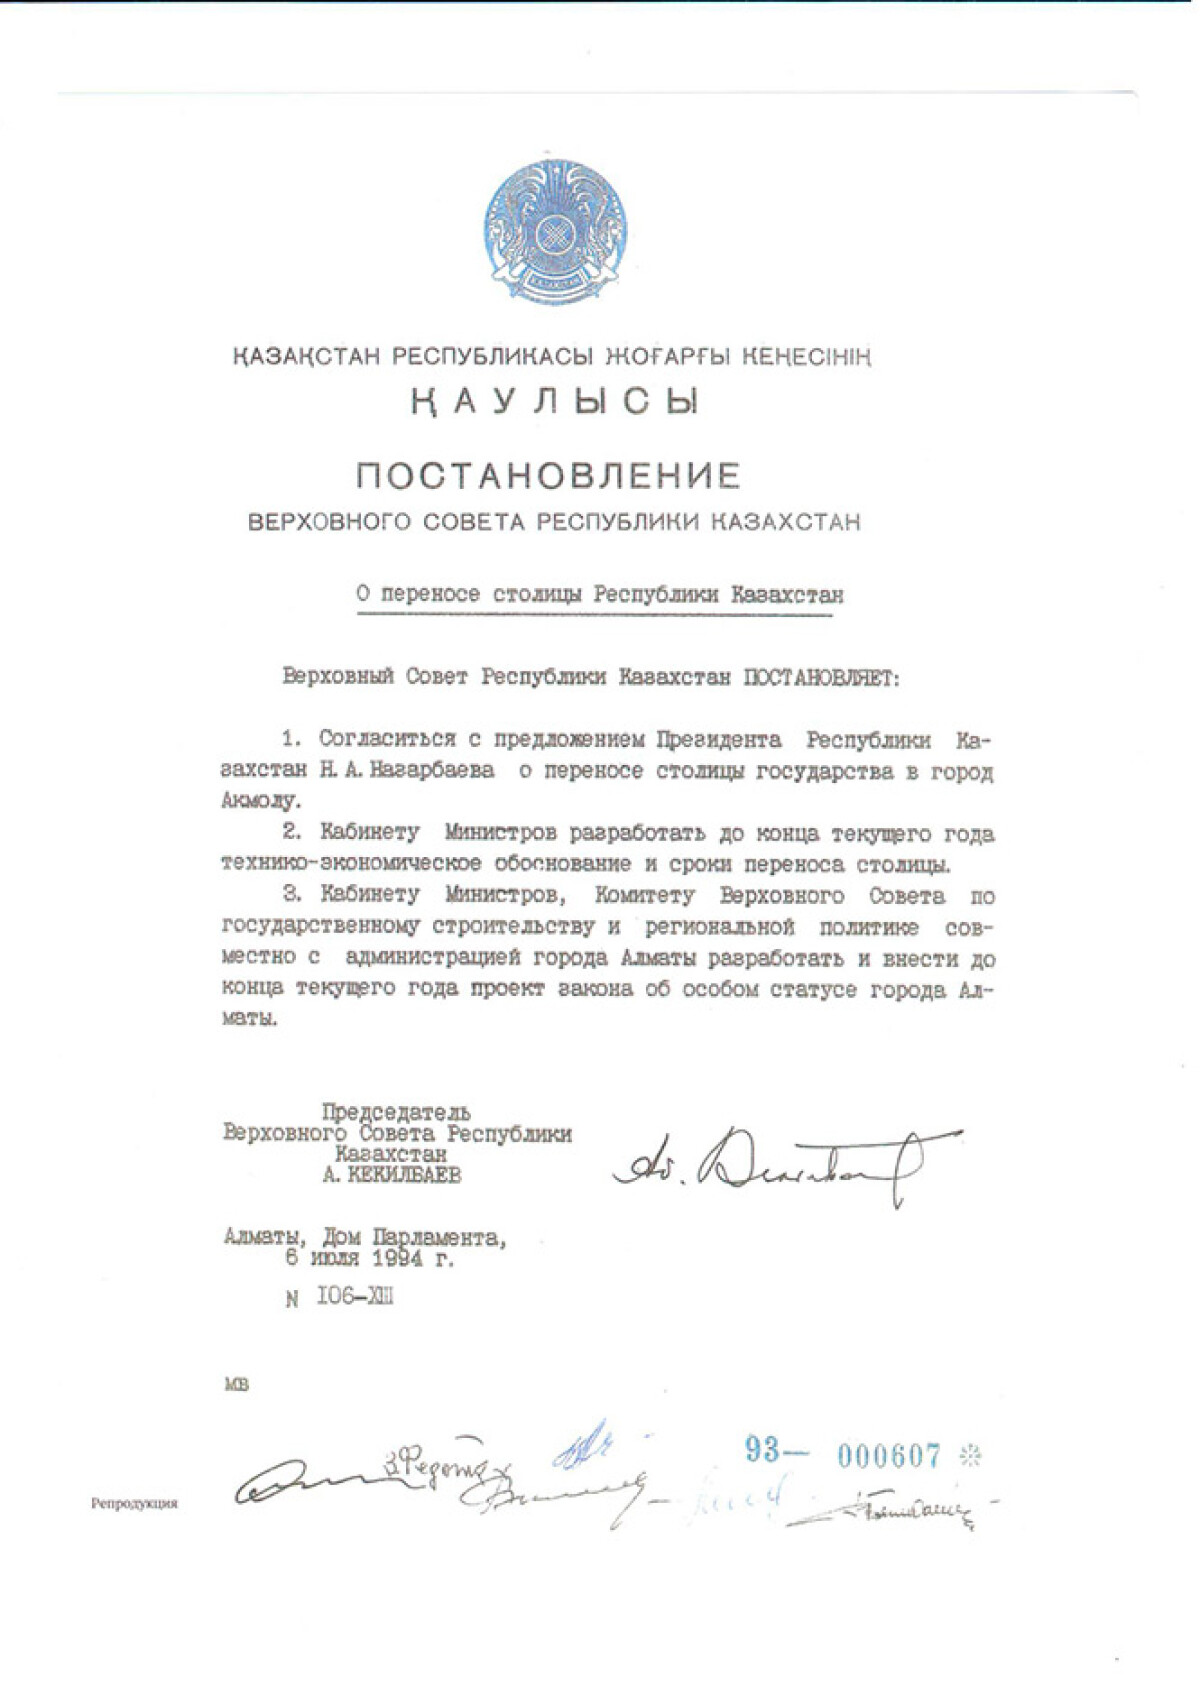 Resolution of the Supreme Council of the Republic of Kazakhstan to move the capital to Akmola and Almaty’s special status from July 6, 1994 - e-history.kz